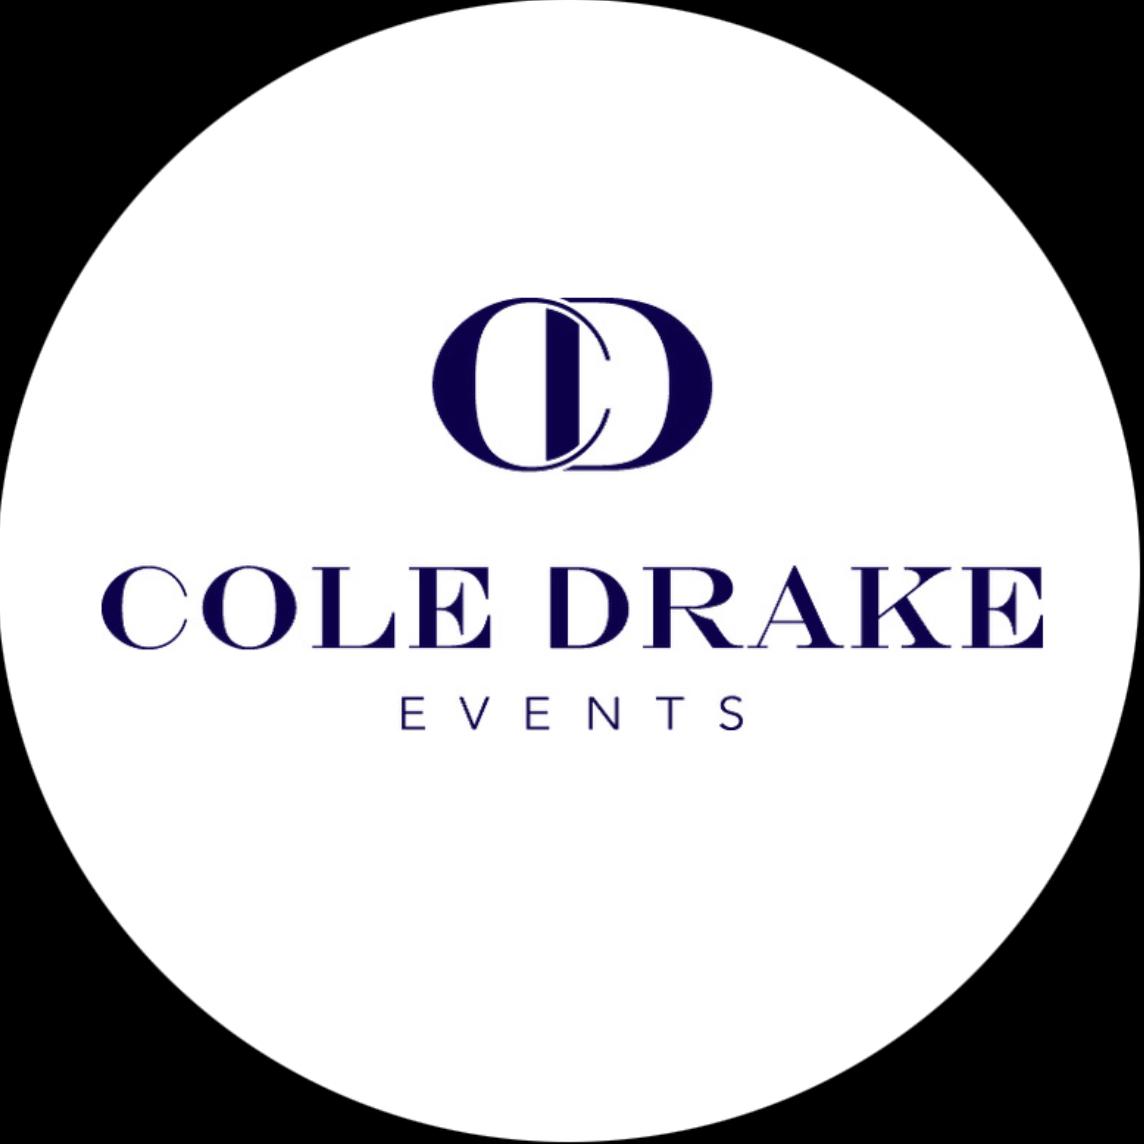 ColeDrakeEvents's images